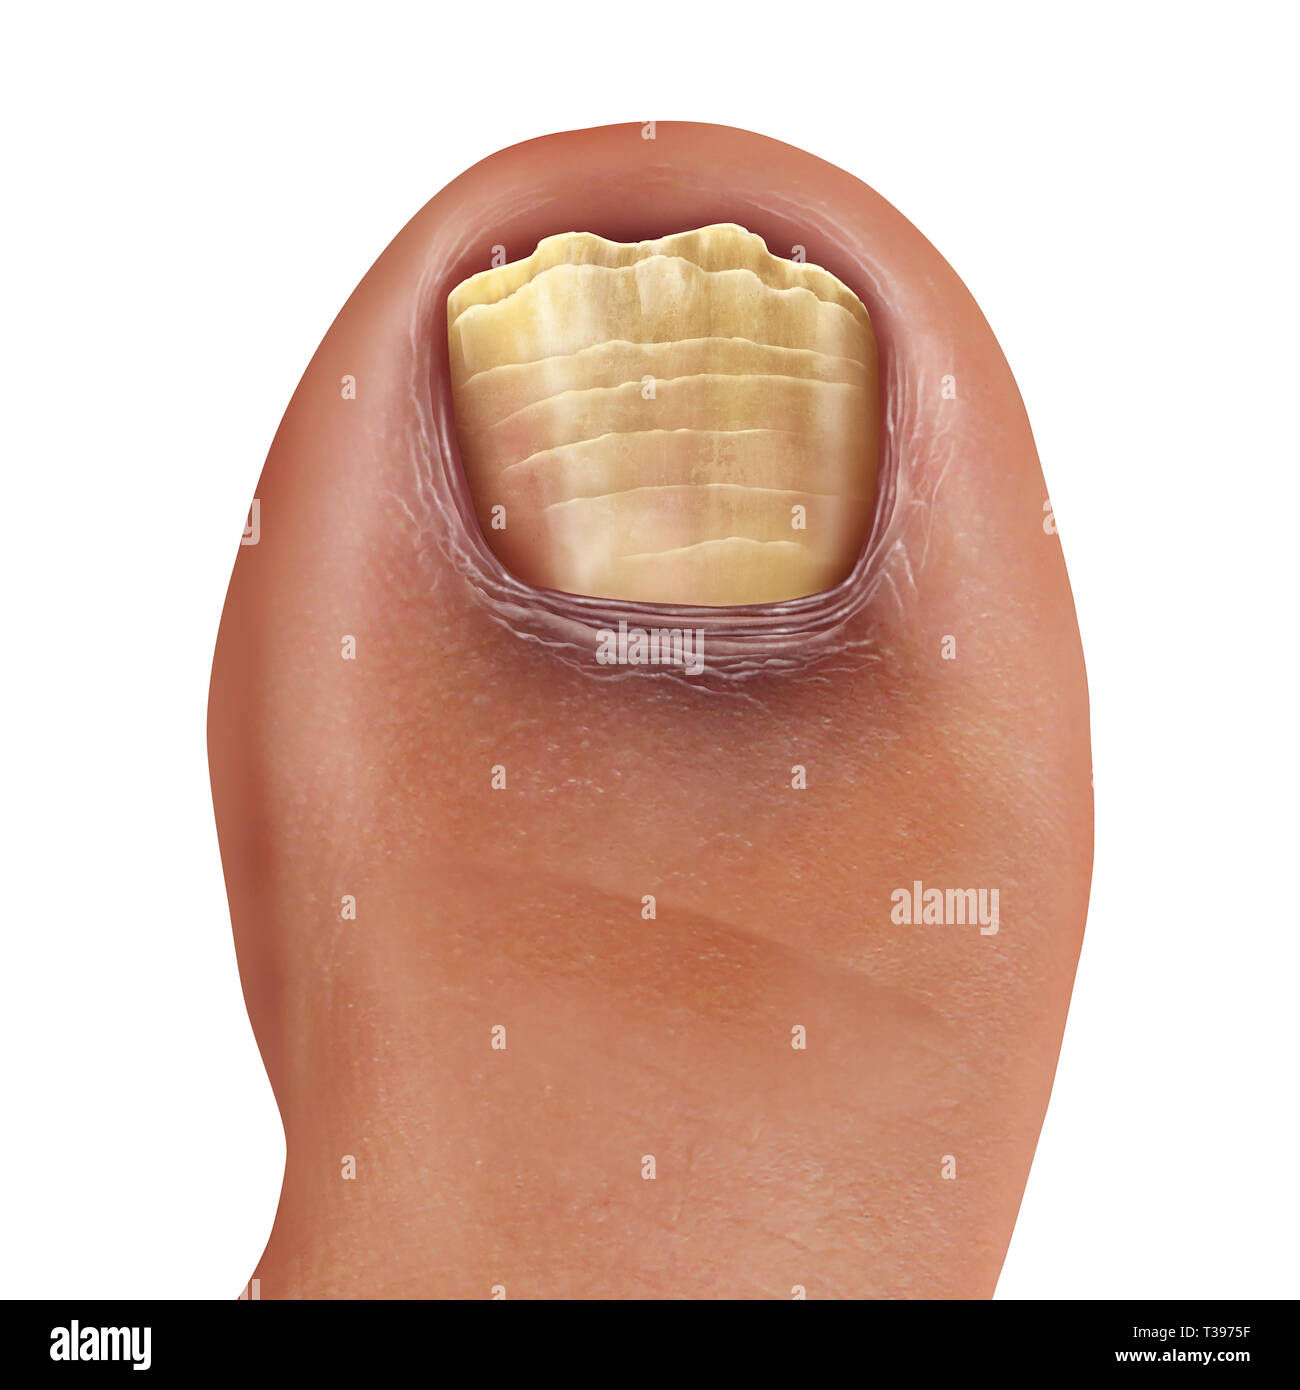 Infected fungal toe nail and feet infection or onychomycosisor tinea unguium as toenail foot disease with damaged unhealthy human anatomy. Stock Photo